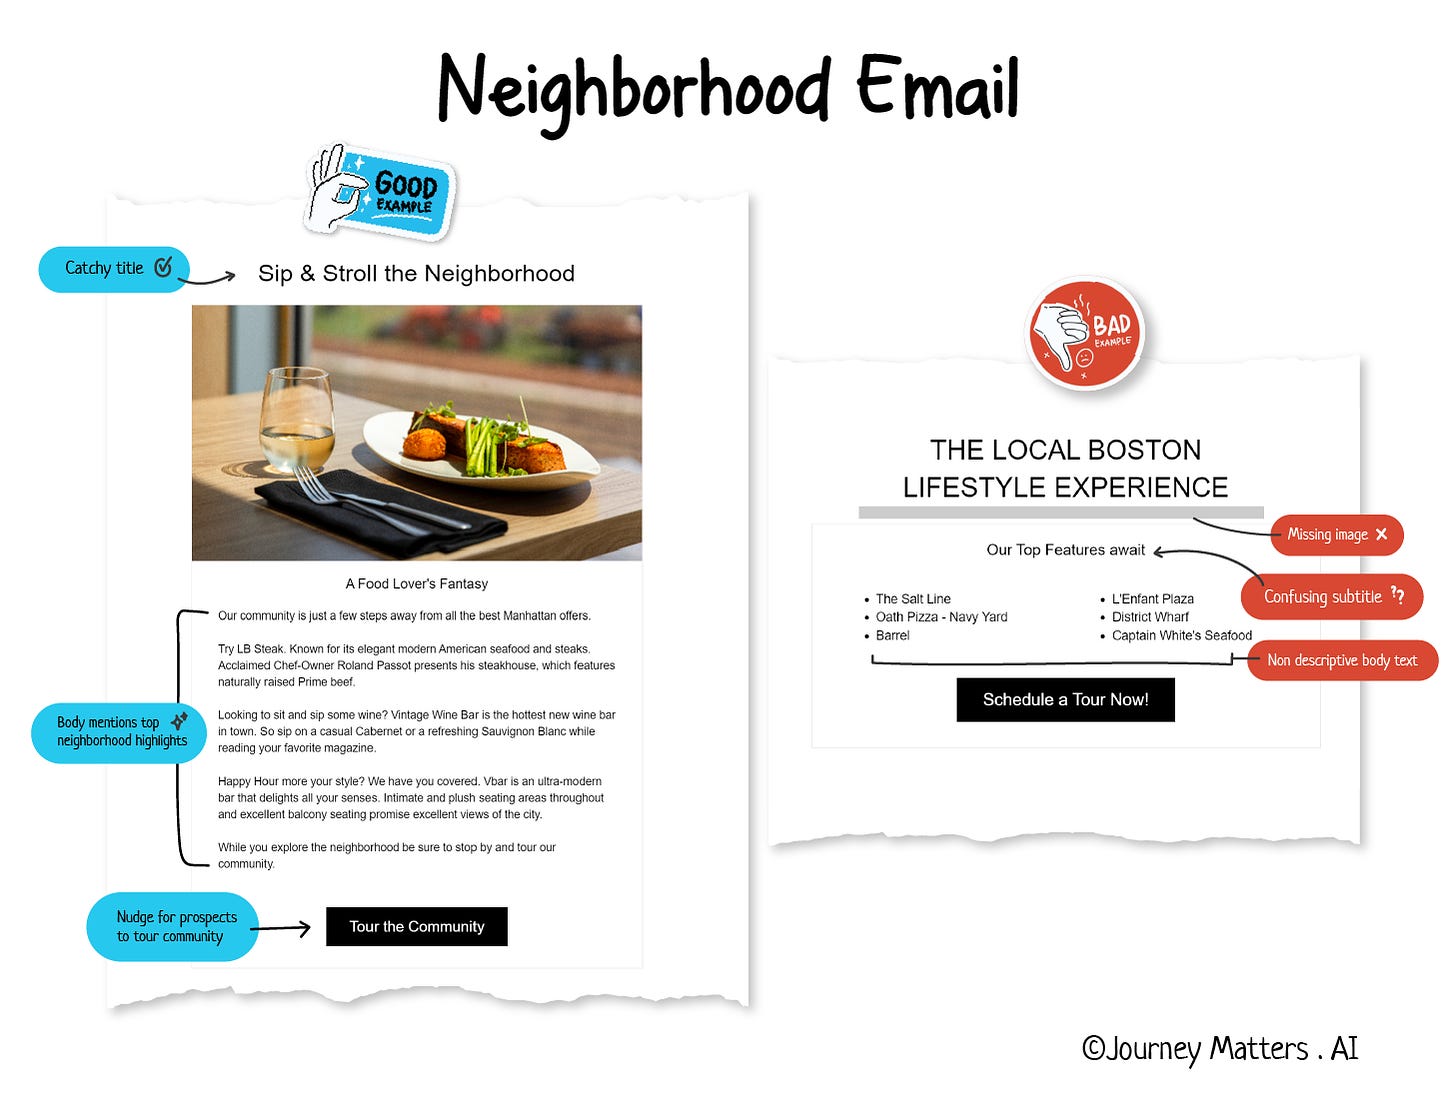 Neighborhood email example with a catchy title, neighborhood highlights in the email body, and CTA to tour the community